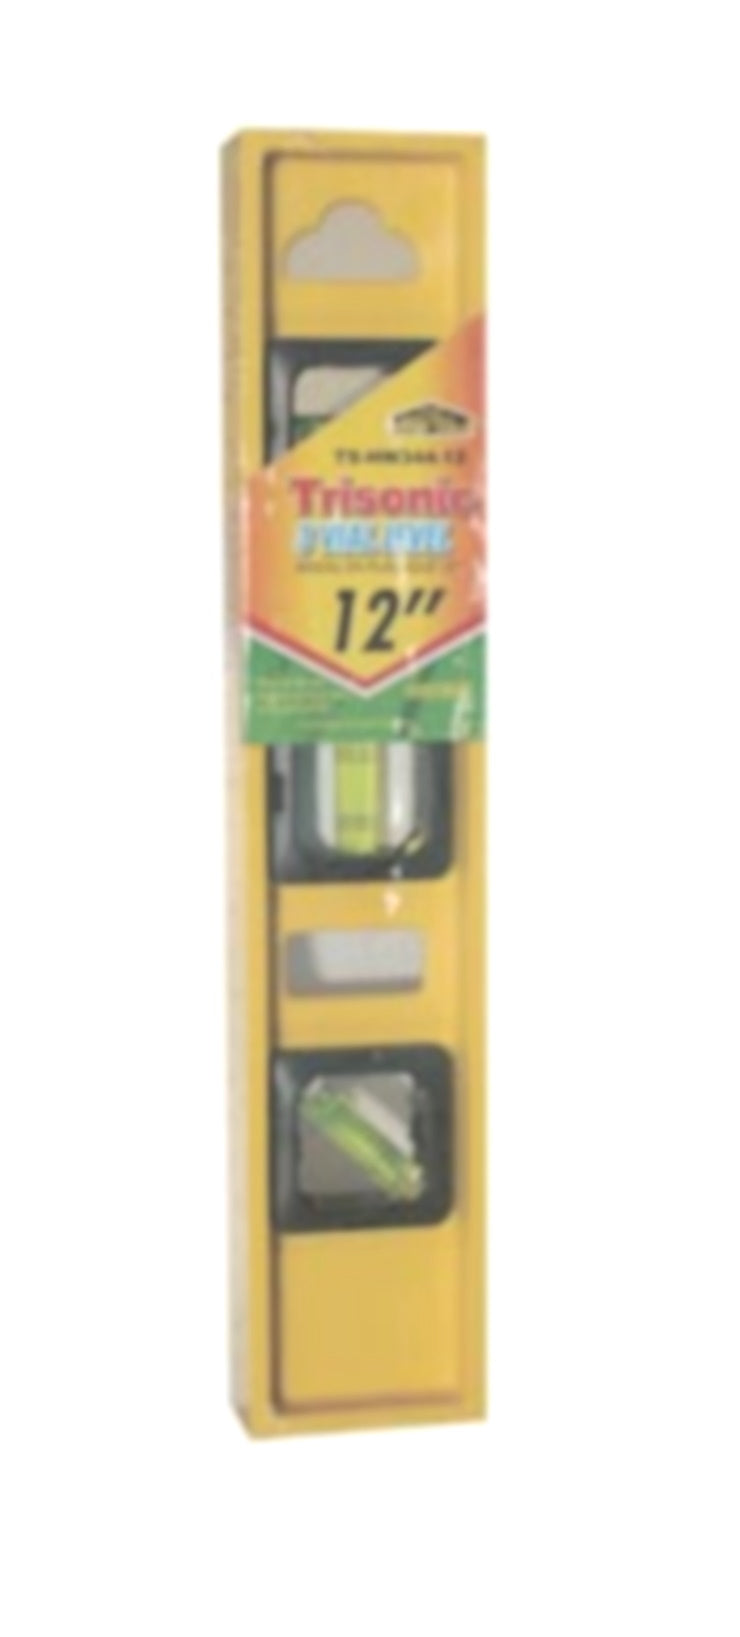 12" - 3 Vial Level - 1 Foot Long Ruled Edge for Accurate Measurements Strong Durable - Trisonic